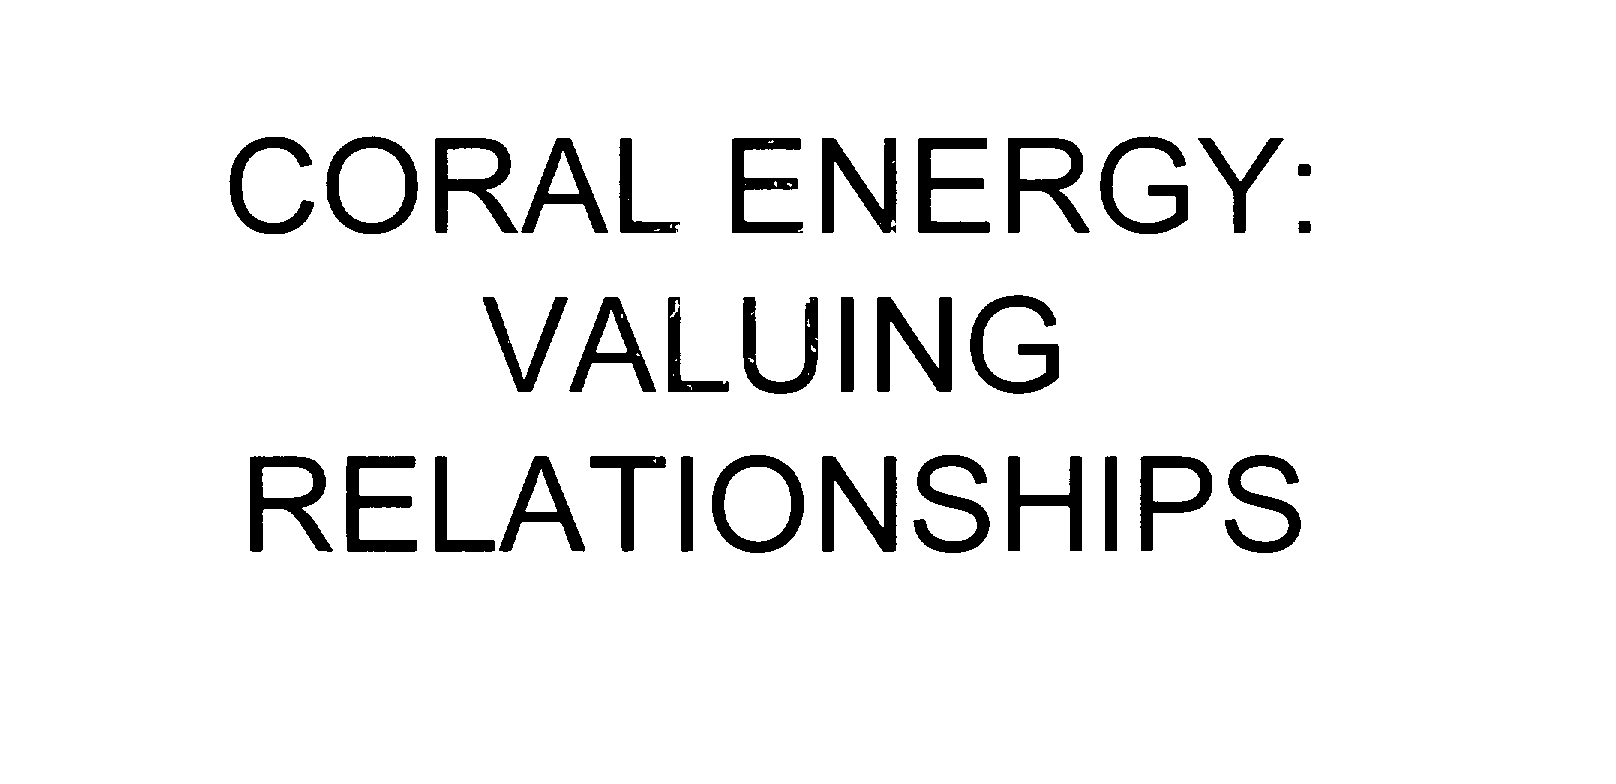  CORAL ENERGY: VALUING RELATIONSHIPS